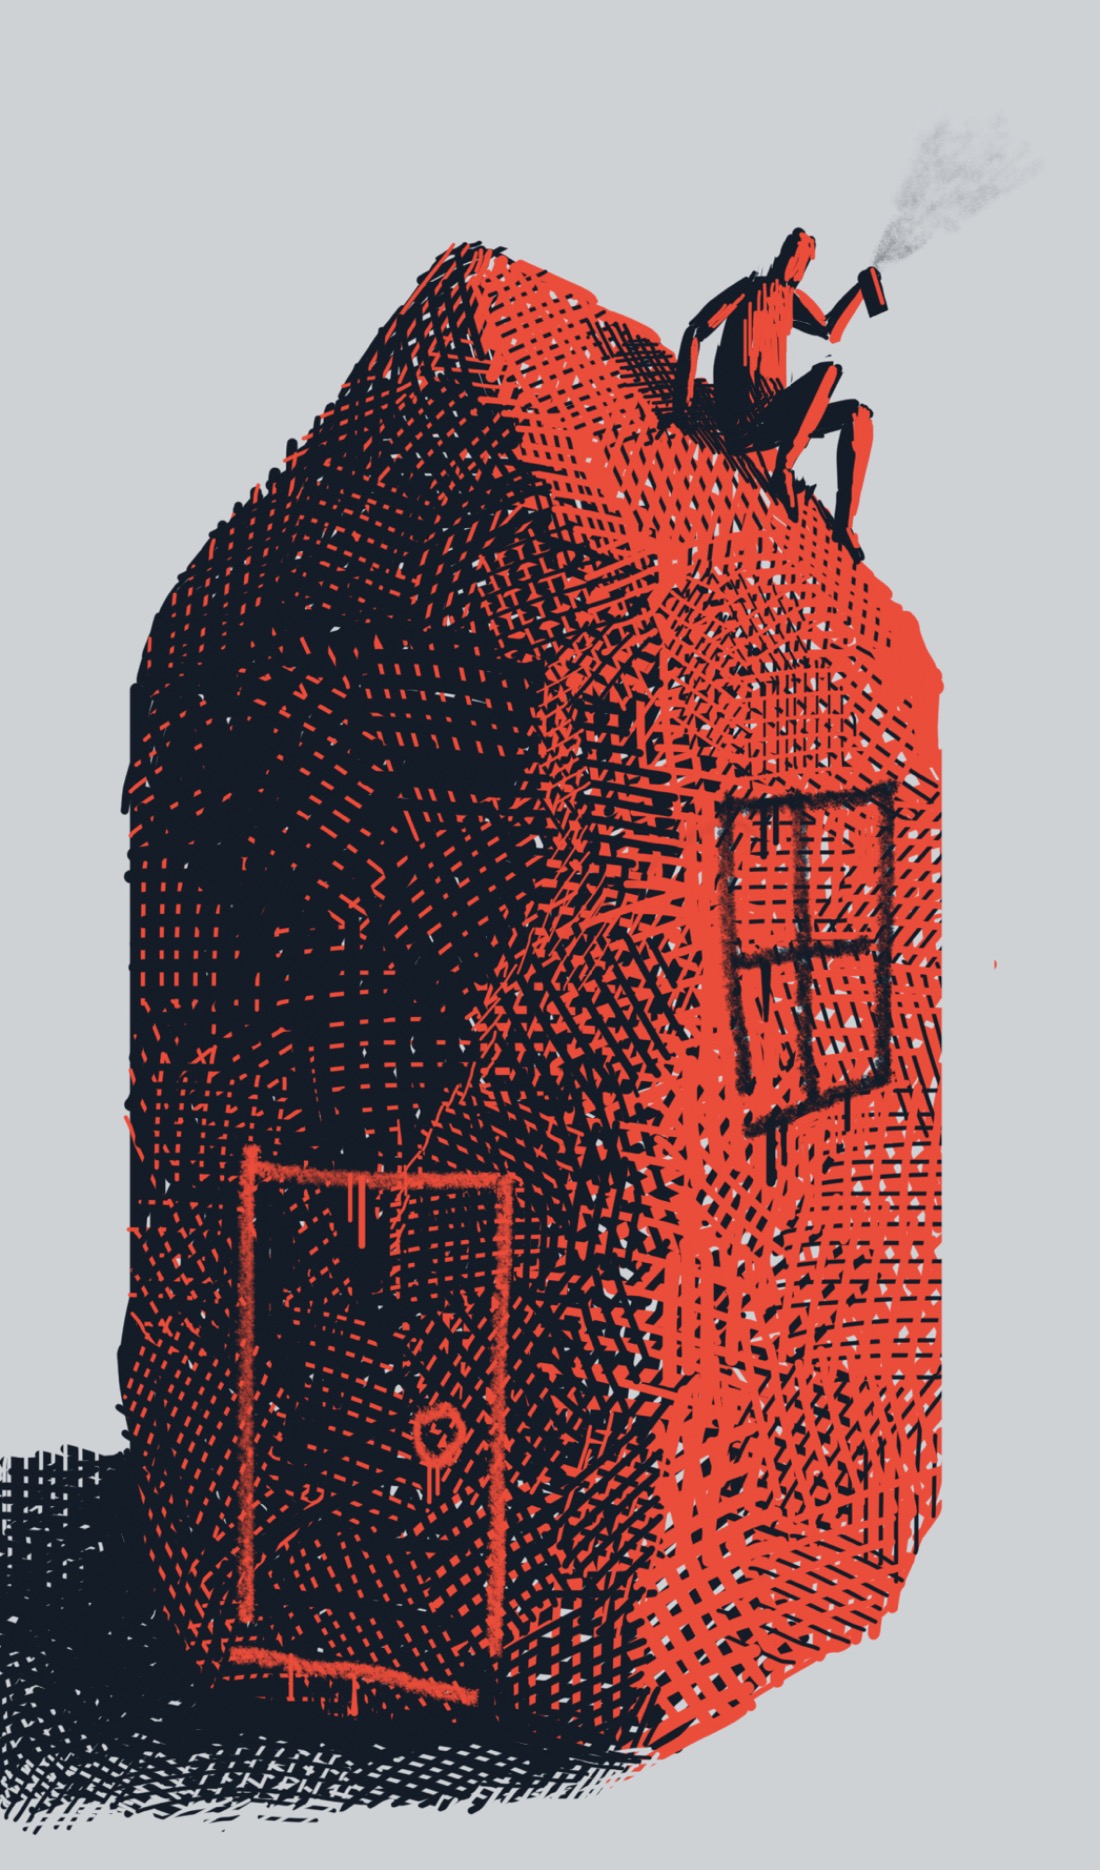 A large, red, house-shaped lump. Imagine a roughly cubical brick or rock with a pointed top. A door is spray-painted on one side, and a window is spray-painted on the other. On top of the house sits a person with a can of spray paint, spraying a jet of black paint into the air.